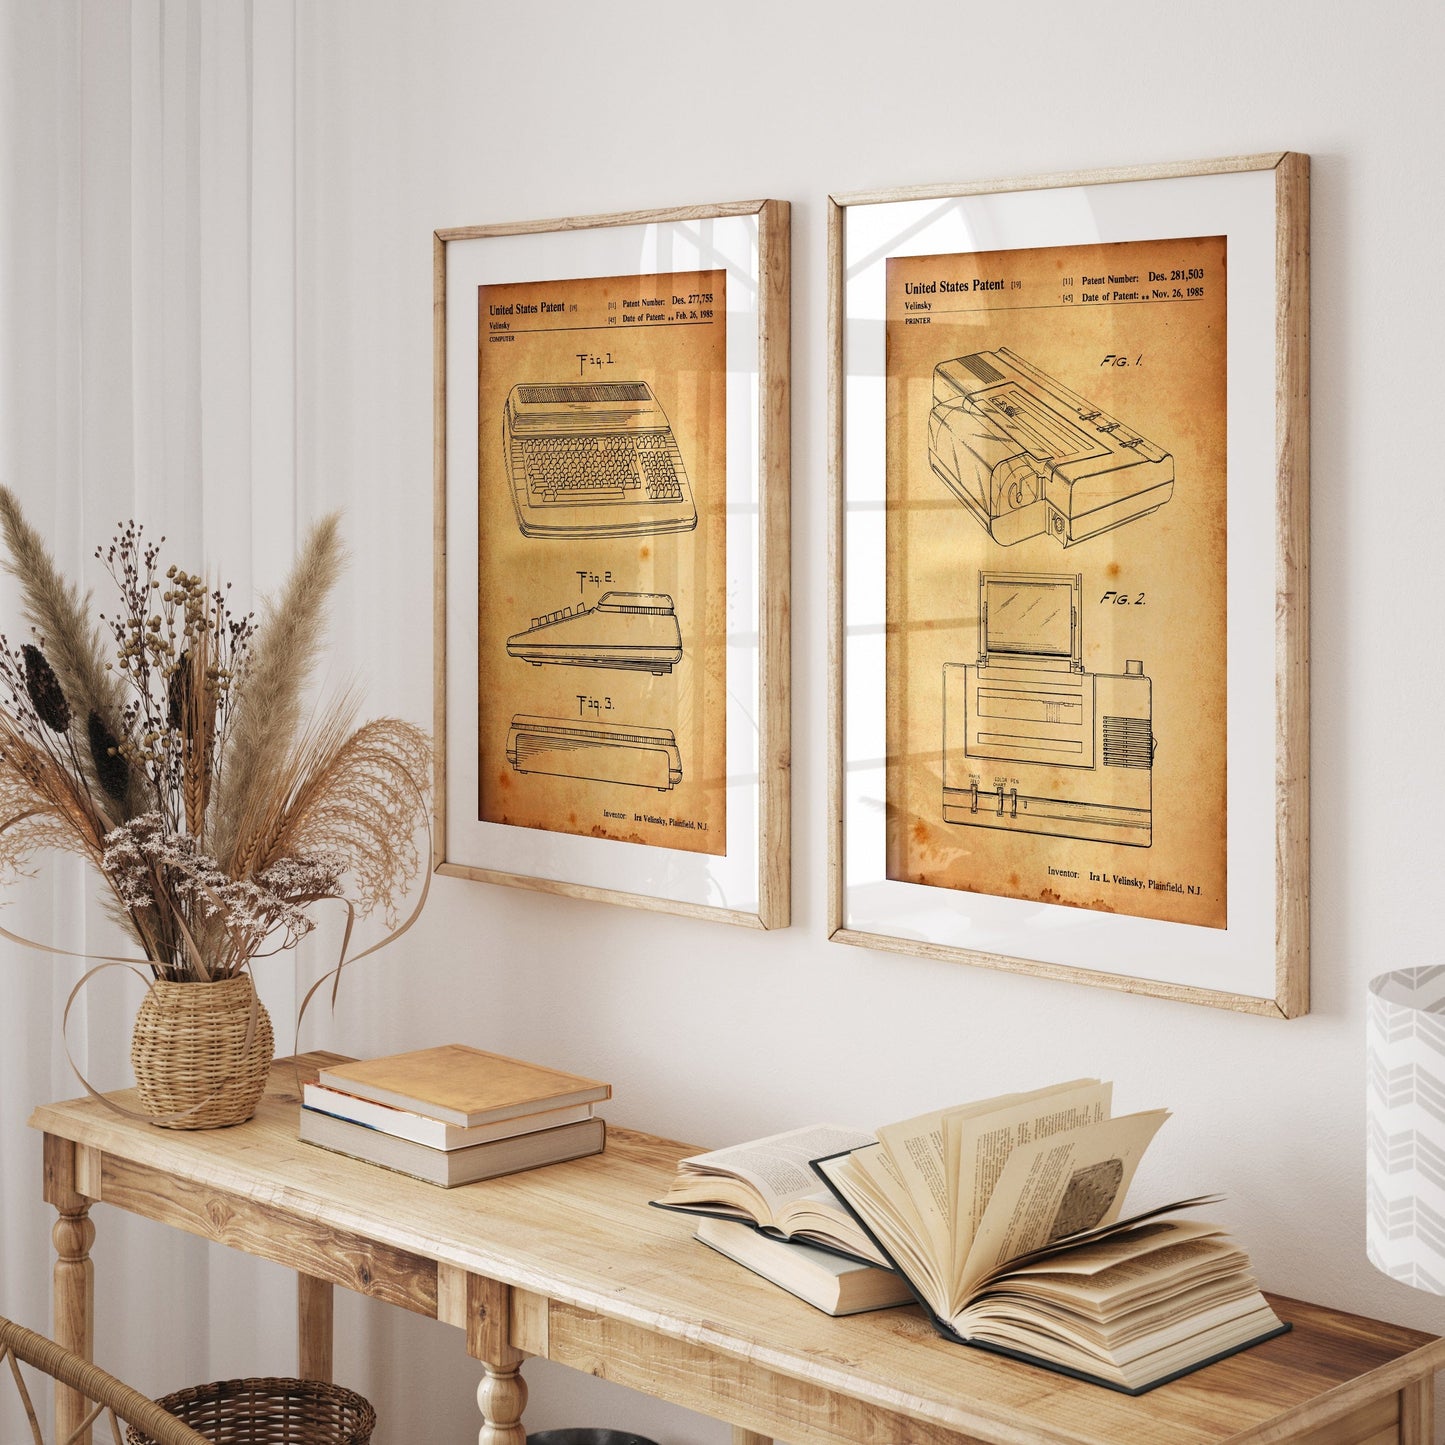 Commodore Computer Set Of 2 Patent Prints - Magic Posters